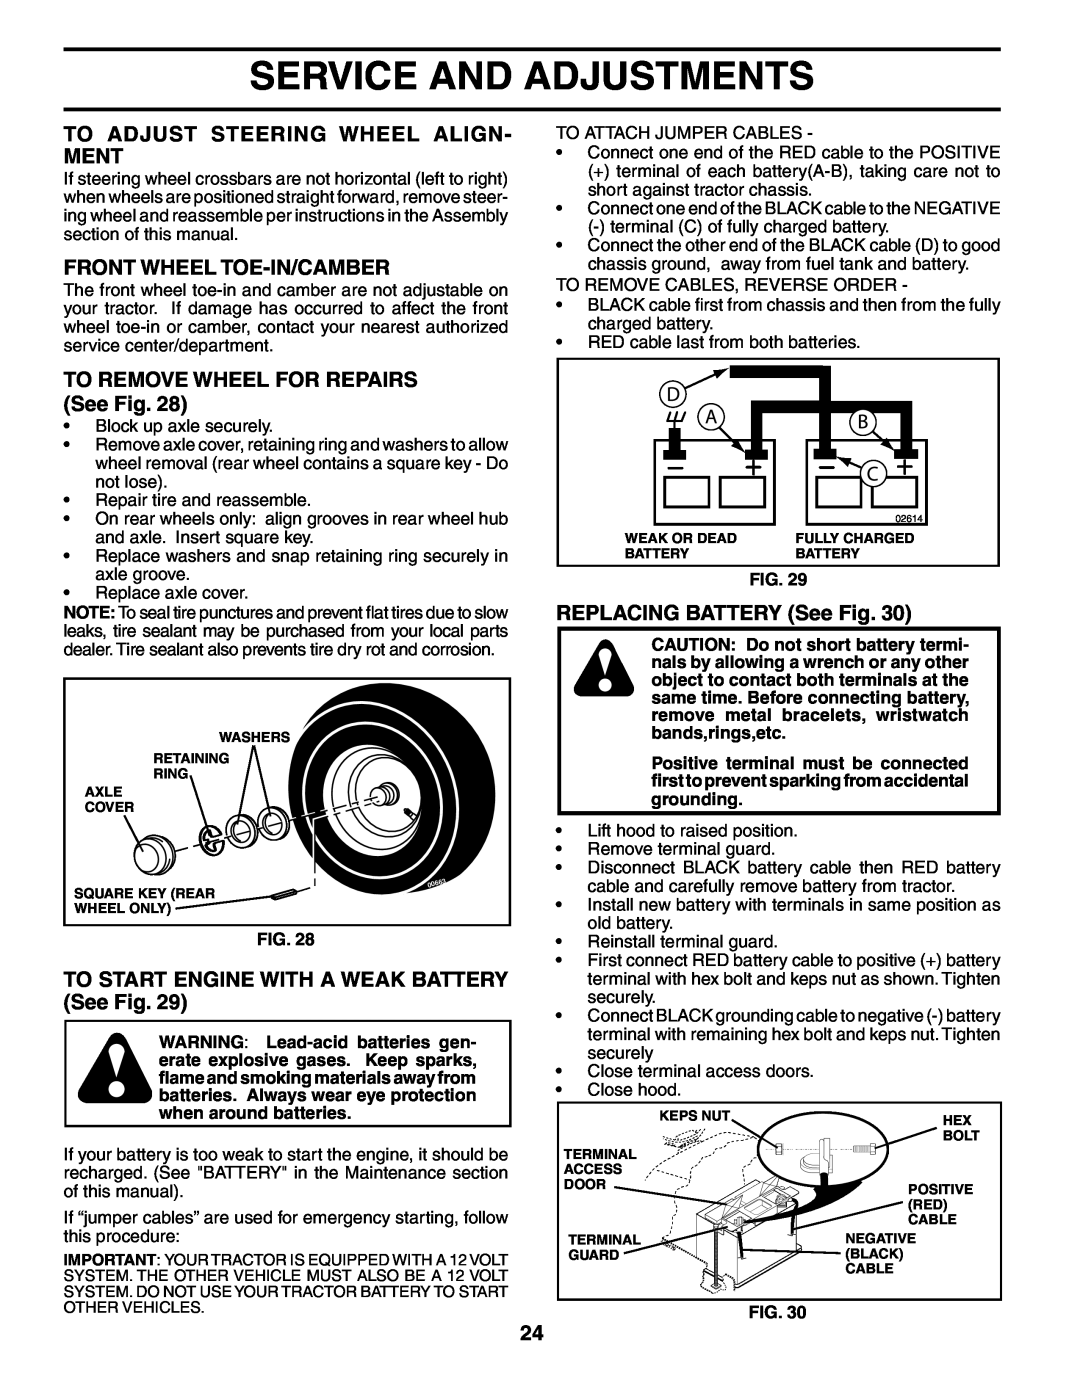 Poulan PD25PH48STB To Adjust Steering Wheel Align- Ment, Front Wheel Toe-In/Camber, TO REMOVE WHEEL FOR REPAIRS See Fig 